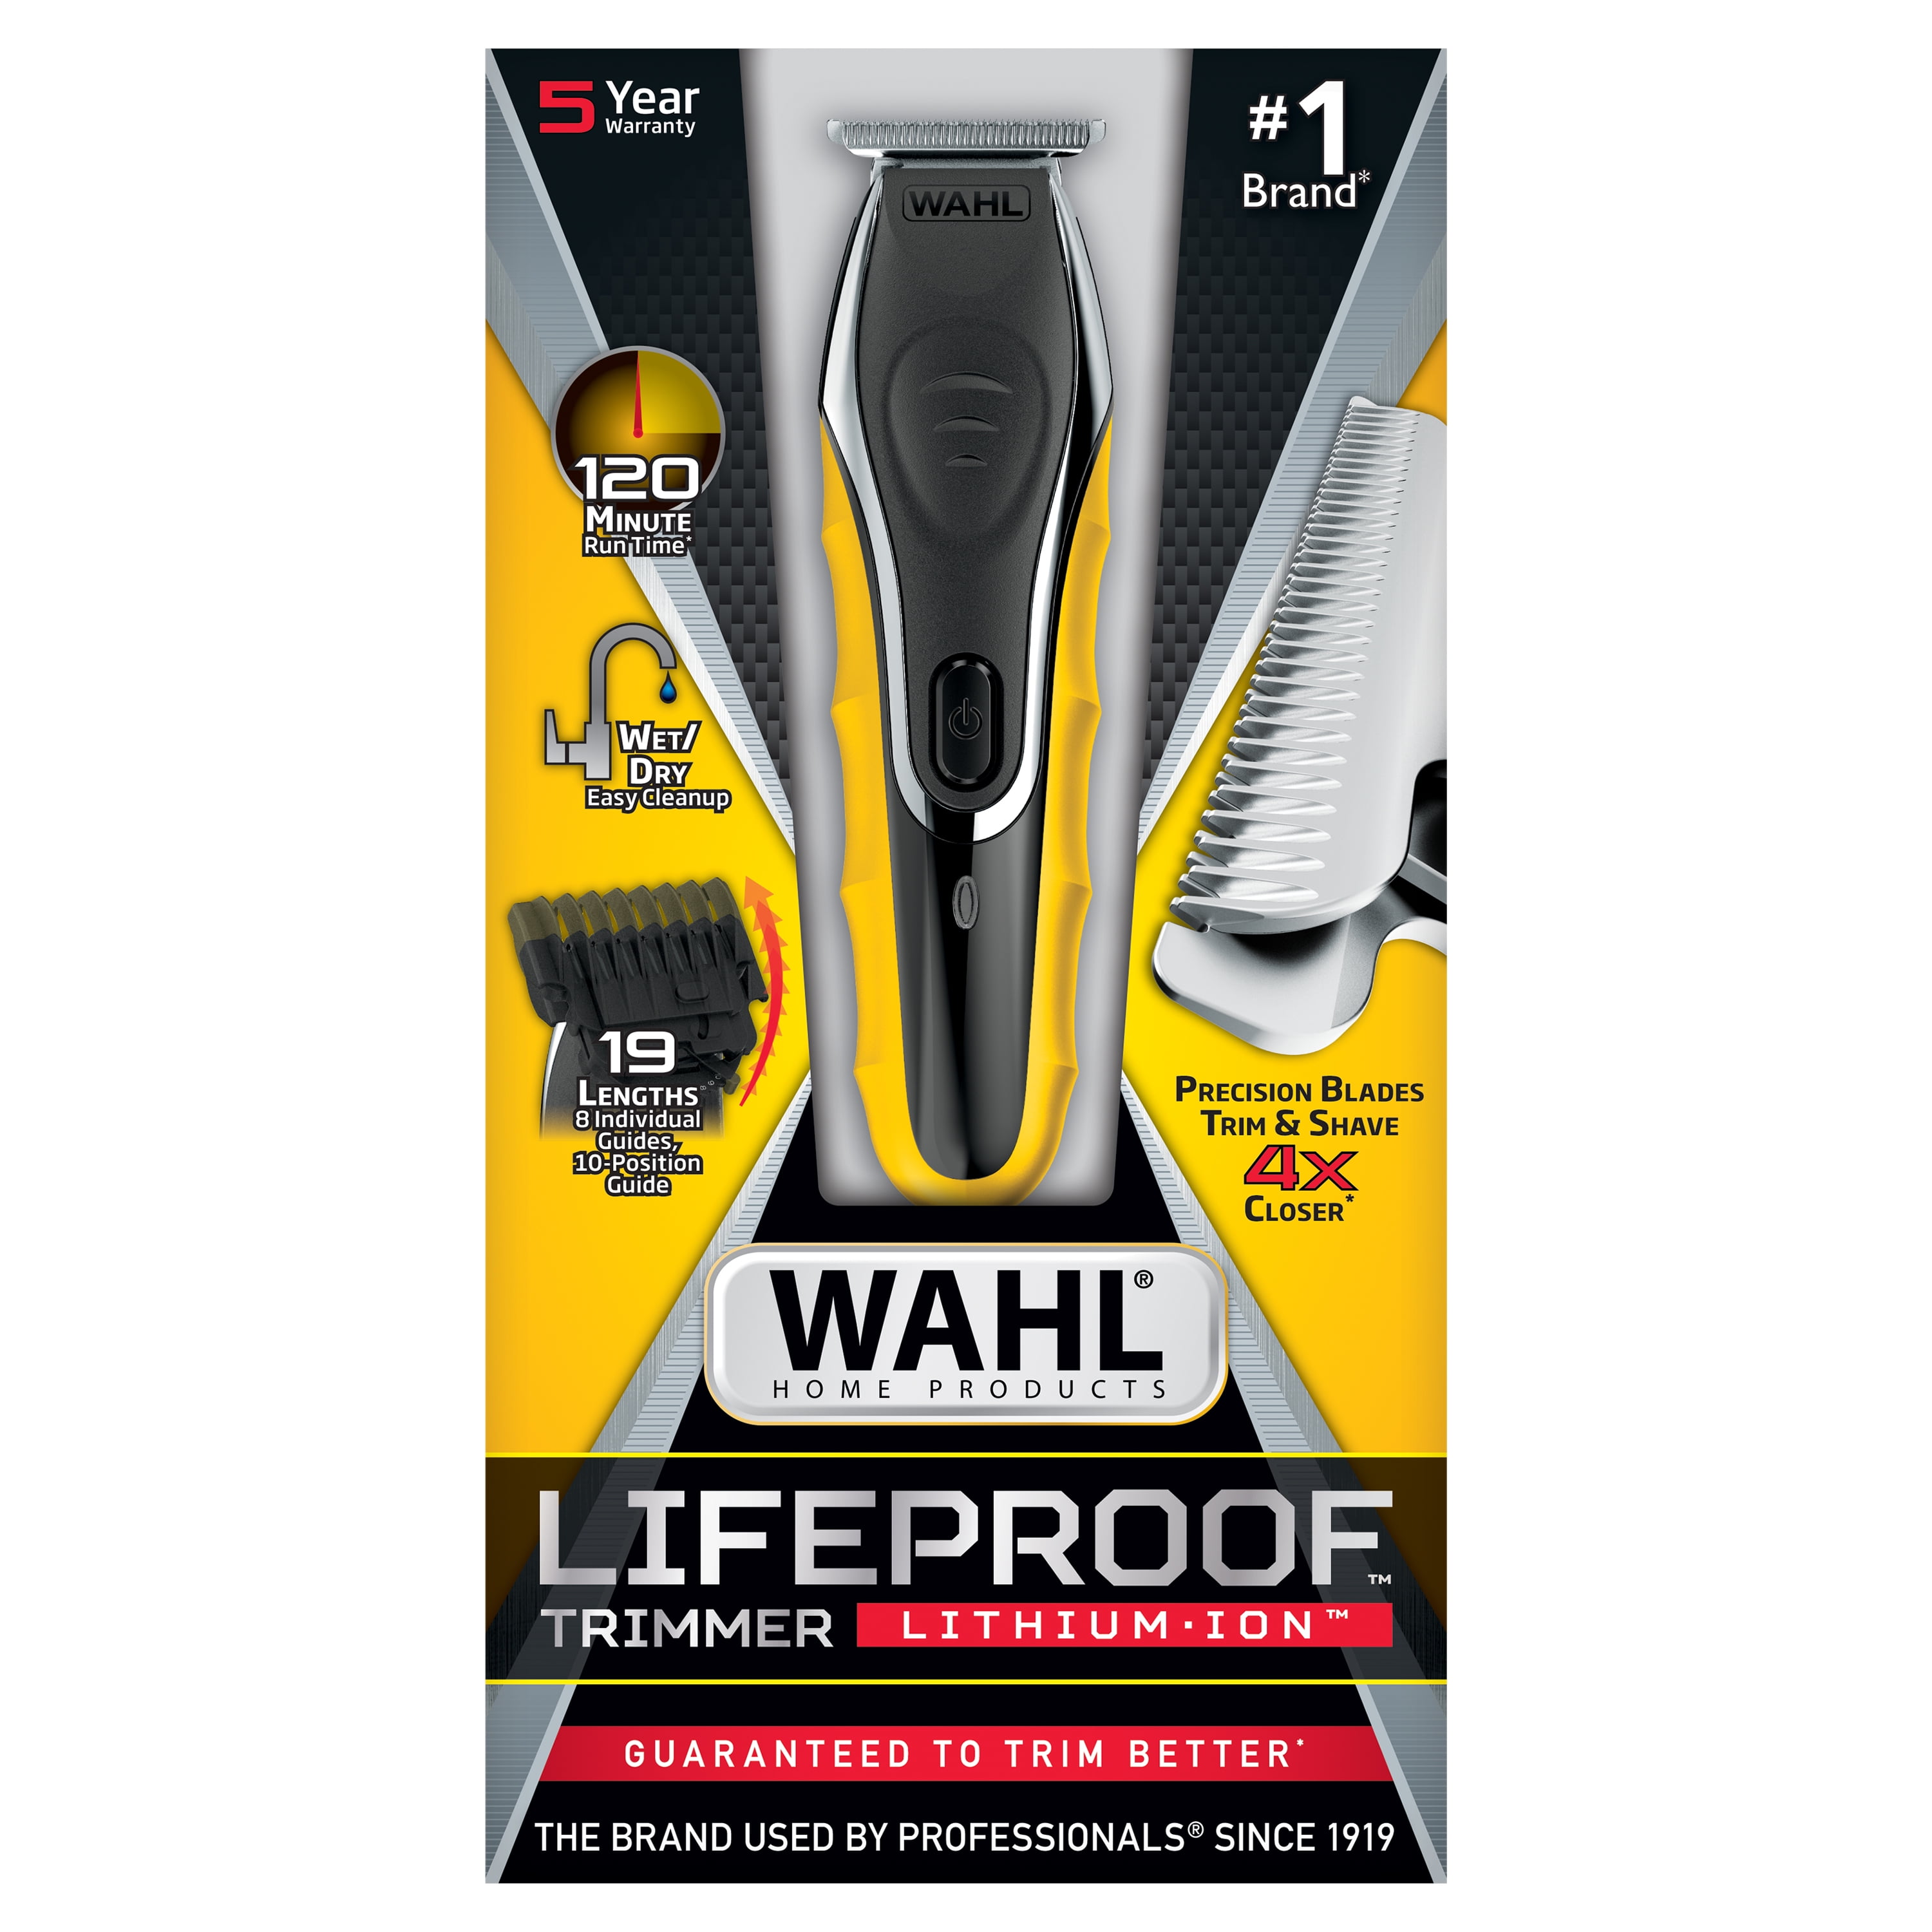 Wet/Dry LifeProof Ion Trimmer Lithium Rechargeable Wahl 9899 for Men, Black/Yellow,